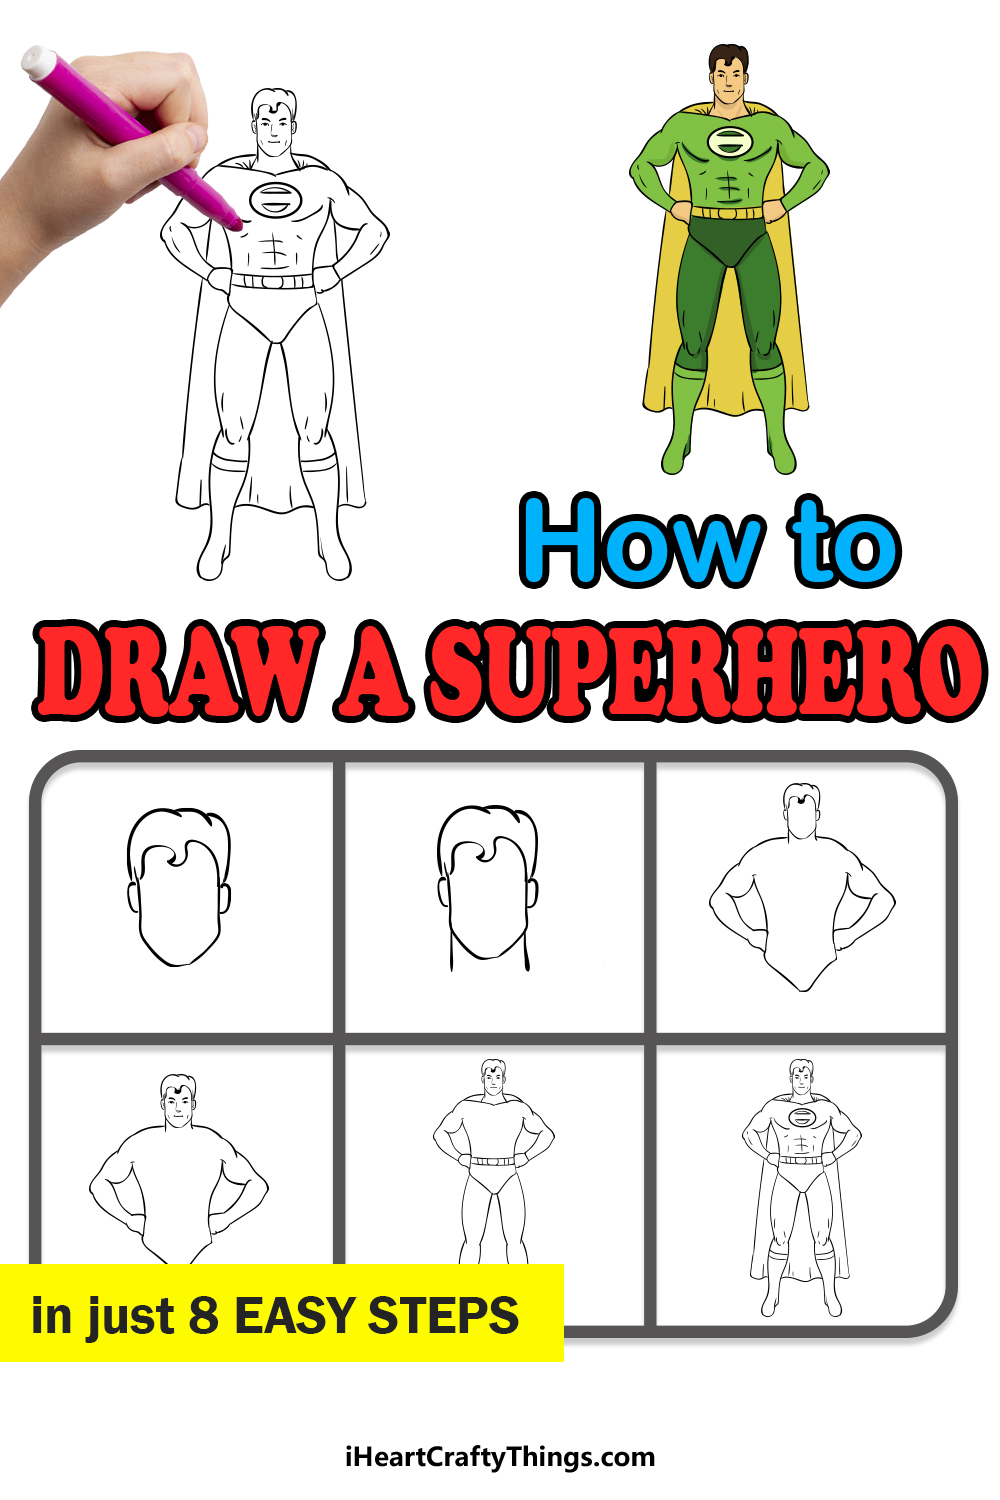 how to draw super hero in 8 easy steps